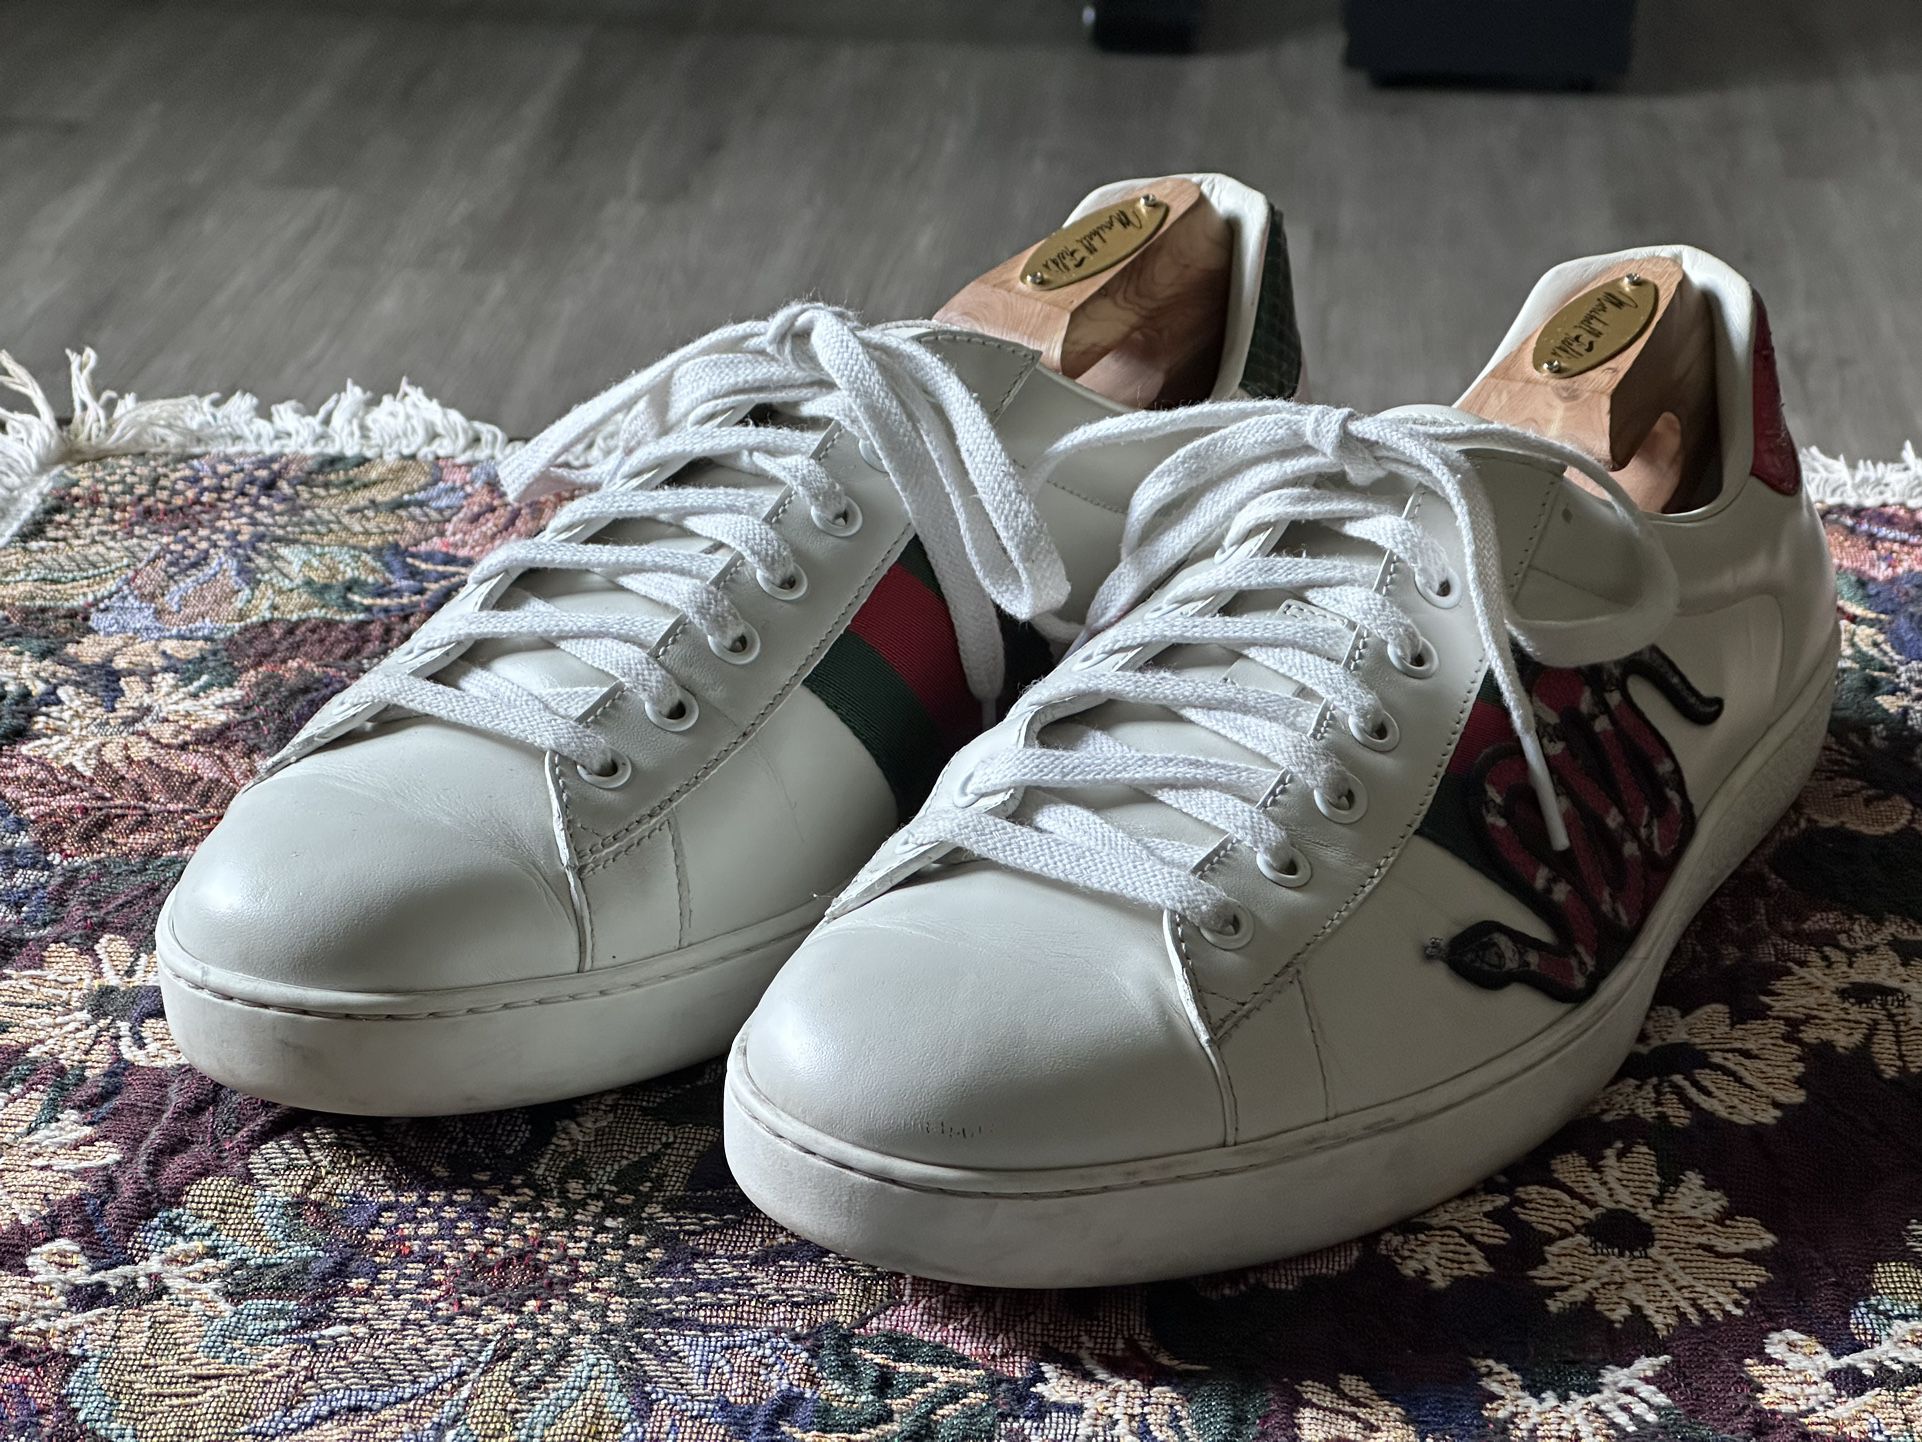 Gucci Ace Embroidered King Snake Men’s White Sneakers Size US 12